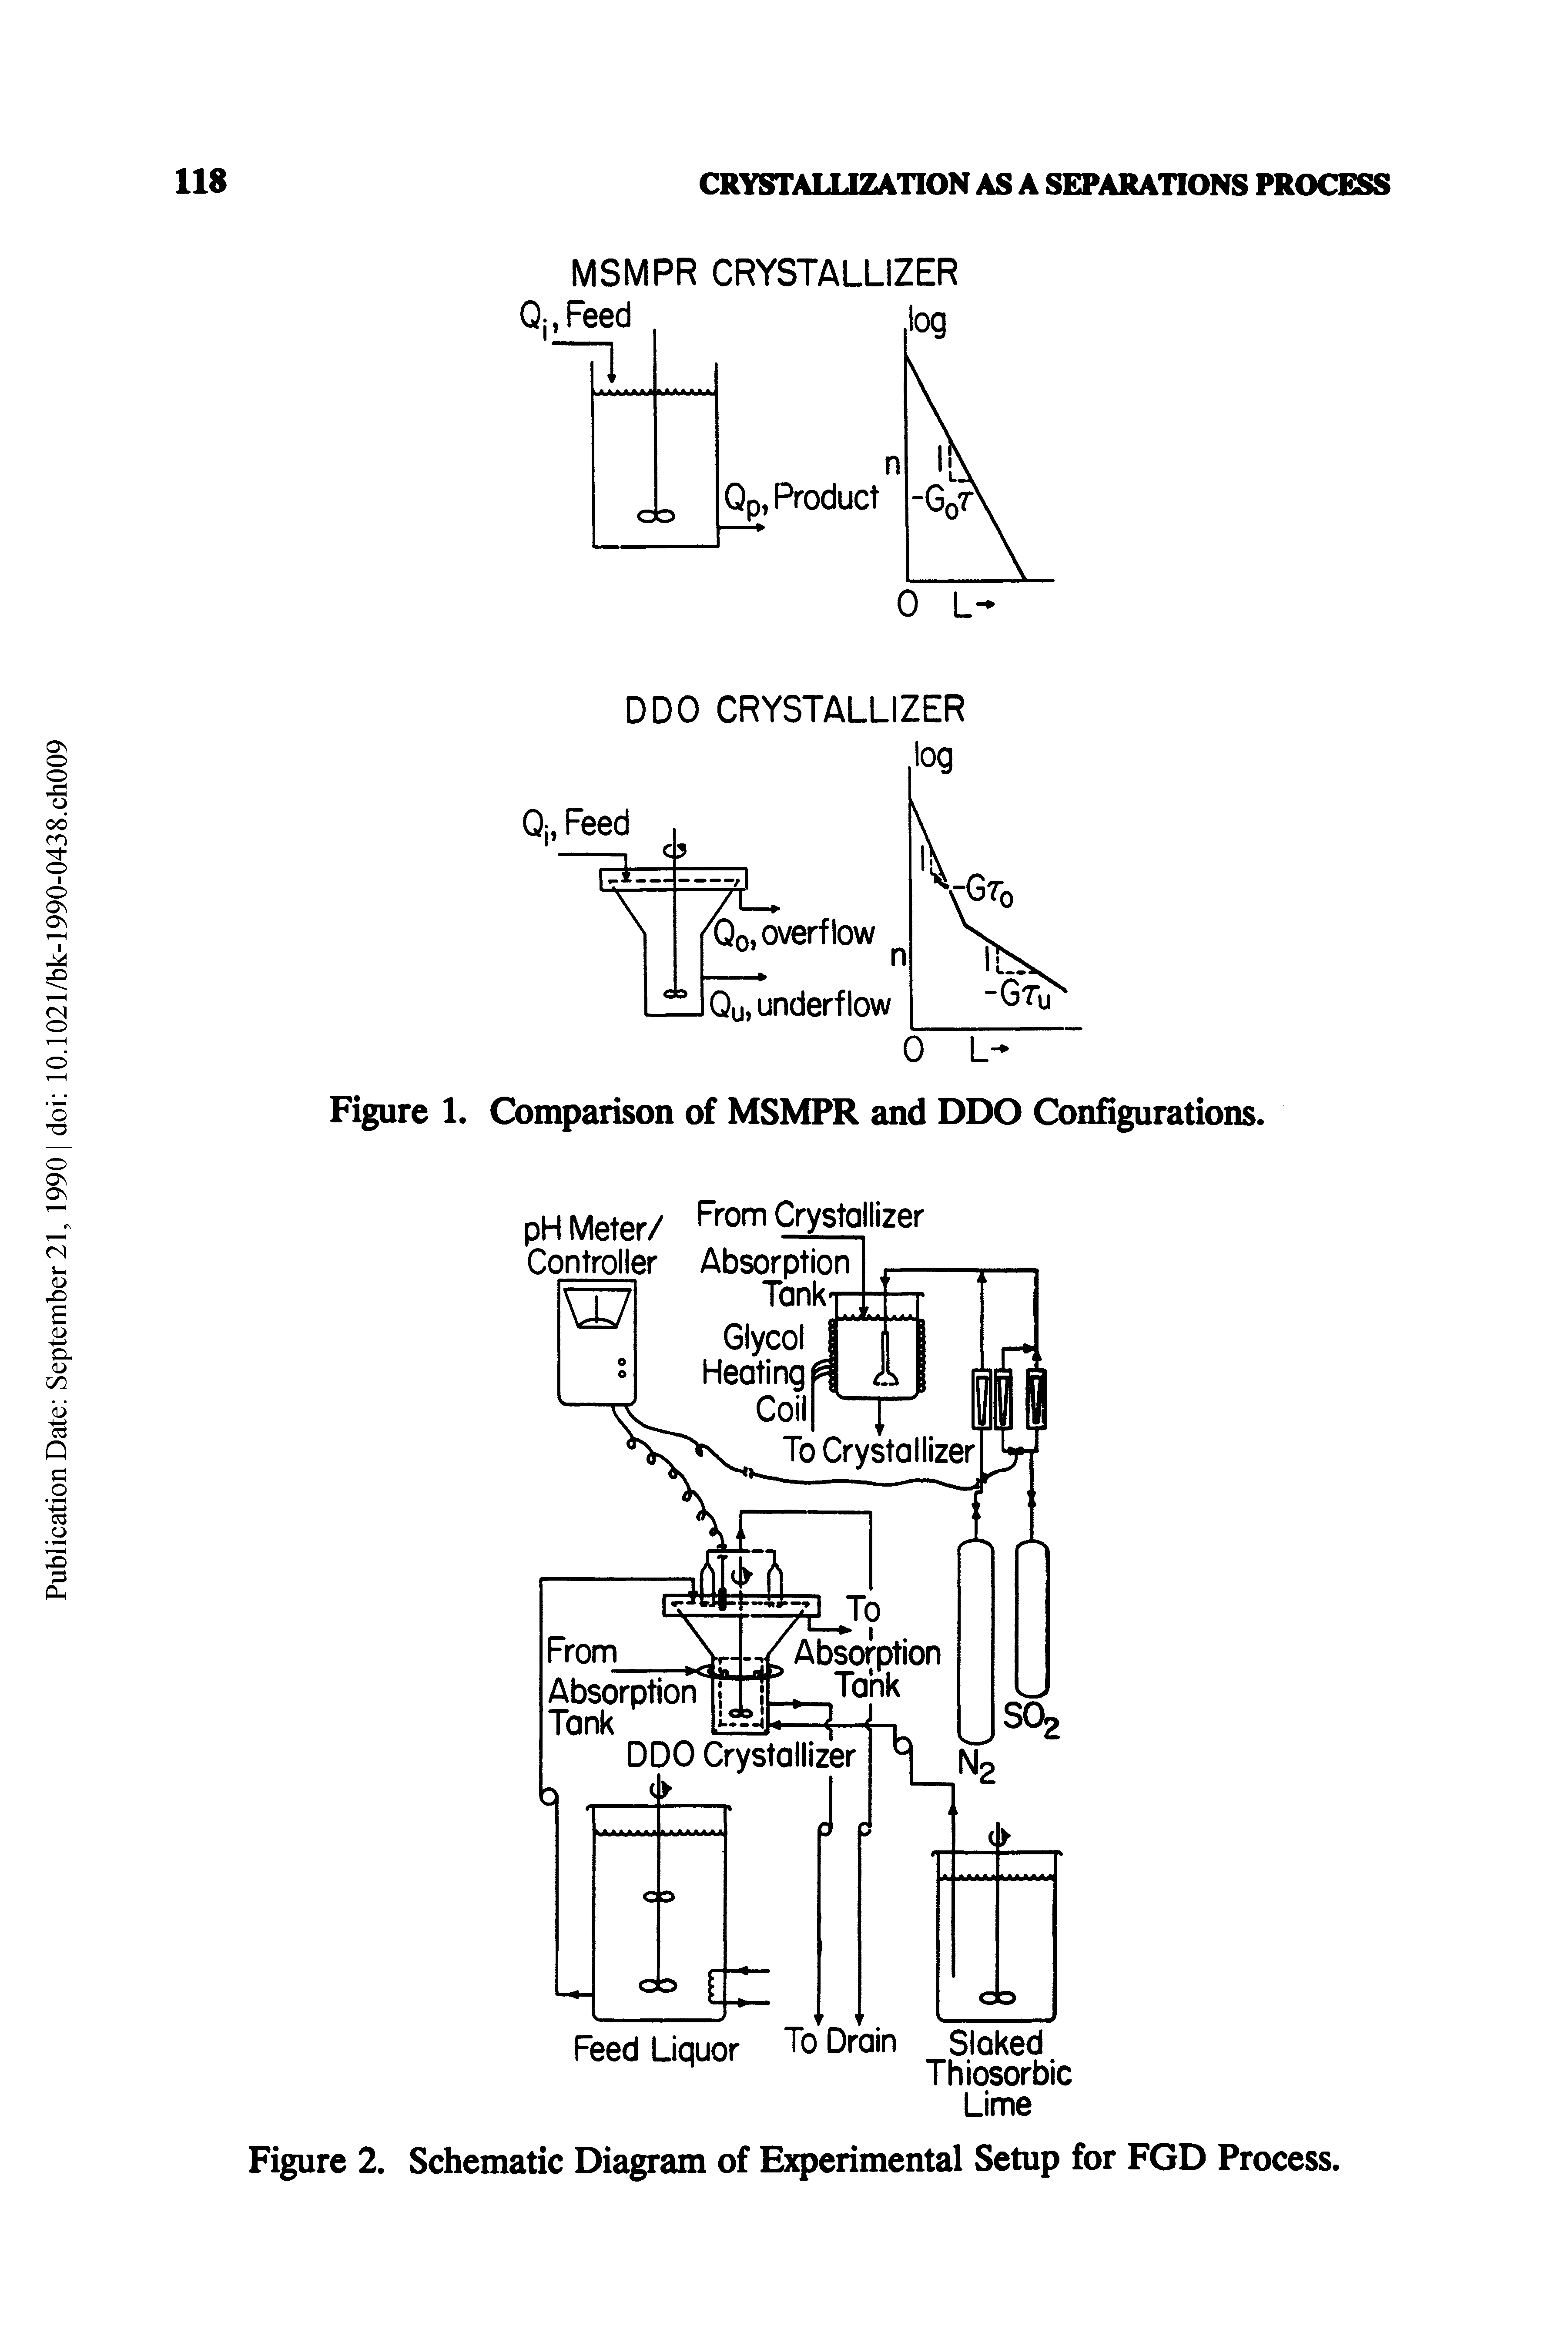 Figure 2. Schematic Diagram of Experimental Setup for FGD Process.